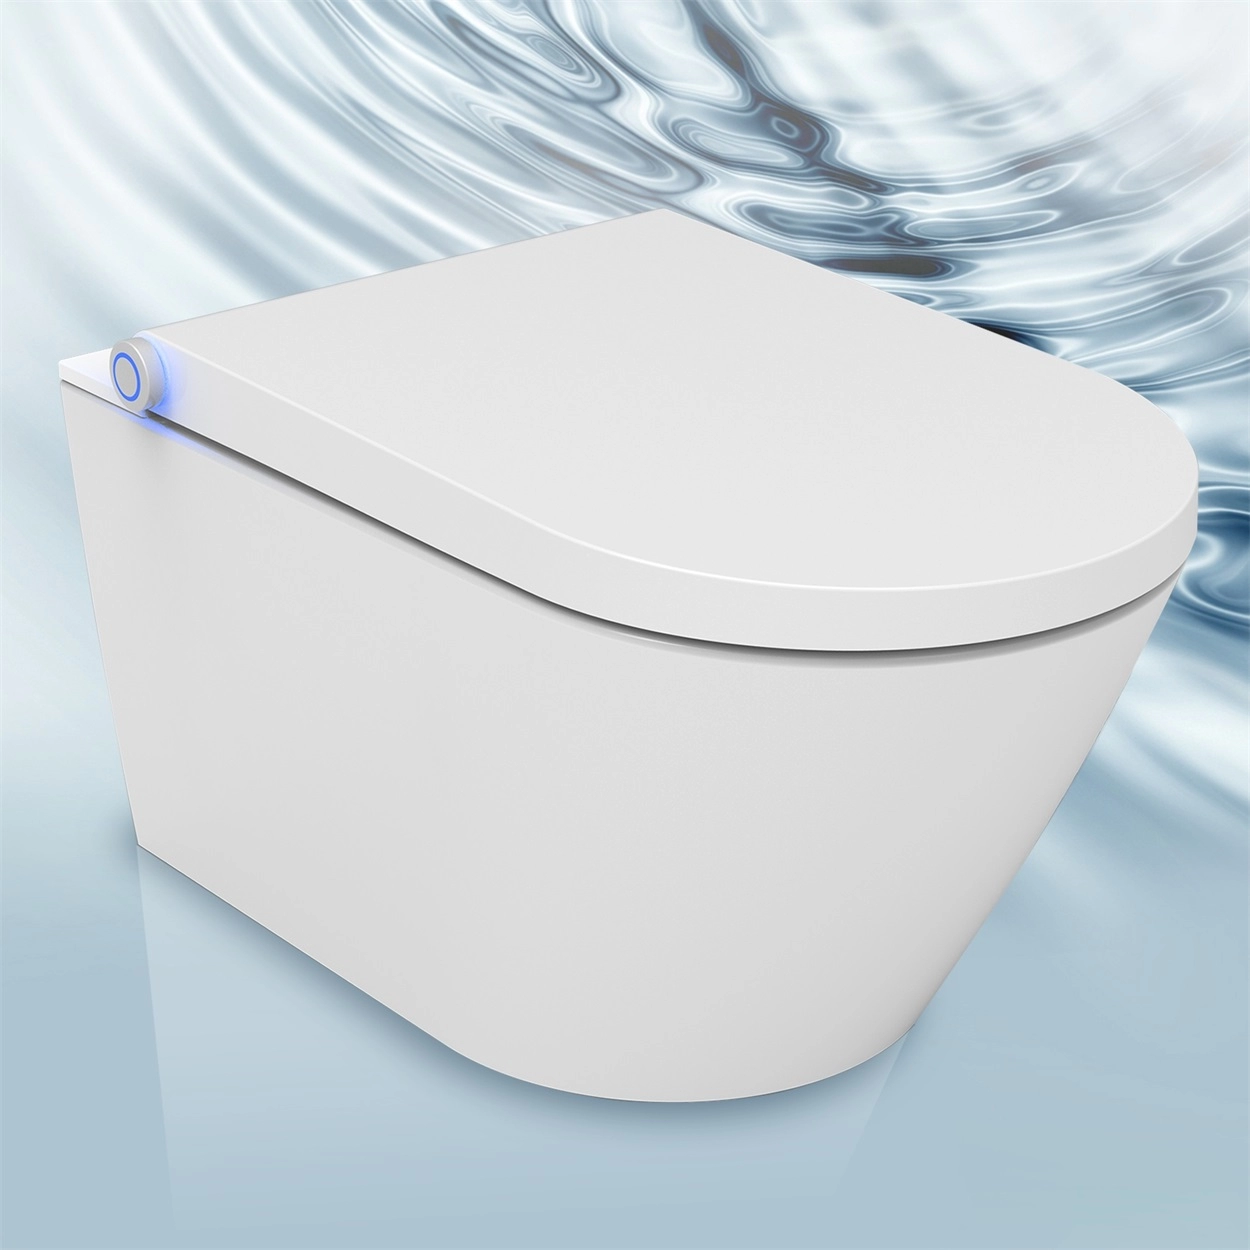 Smart toilet constructed of high-quality and sturdy material